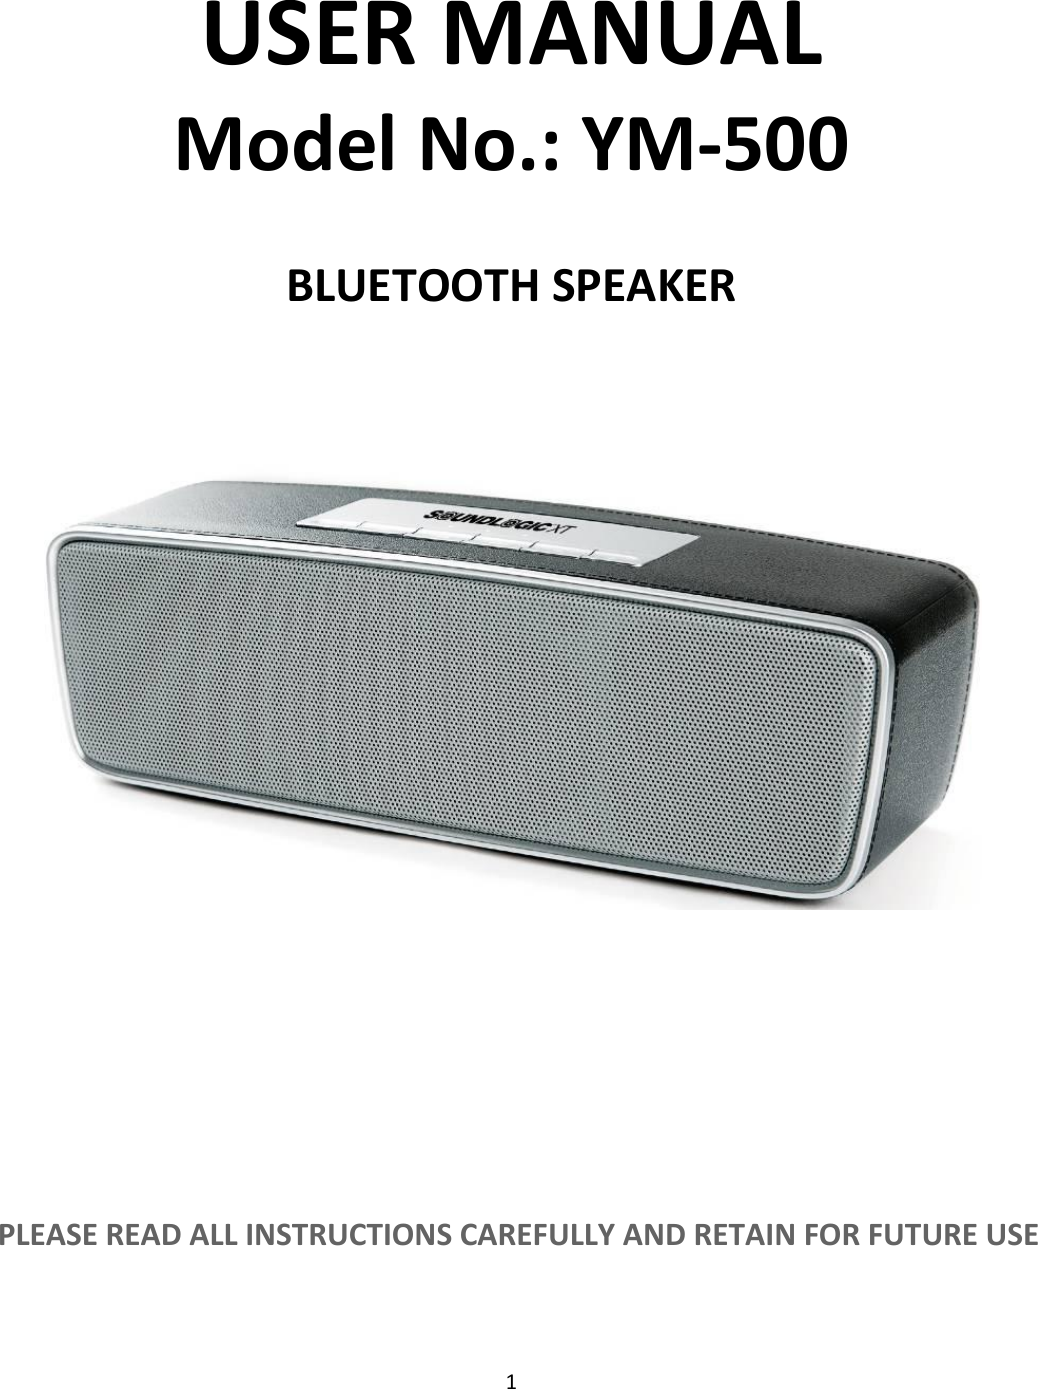 1  USER MANUAL Model No.: YM-500  BLUETOOTH SPEAKER             PLEASE READ ALL INSTRUCTIONS CAREFULLY AND RETAIN FOR FUTURE USE   